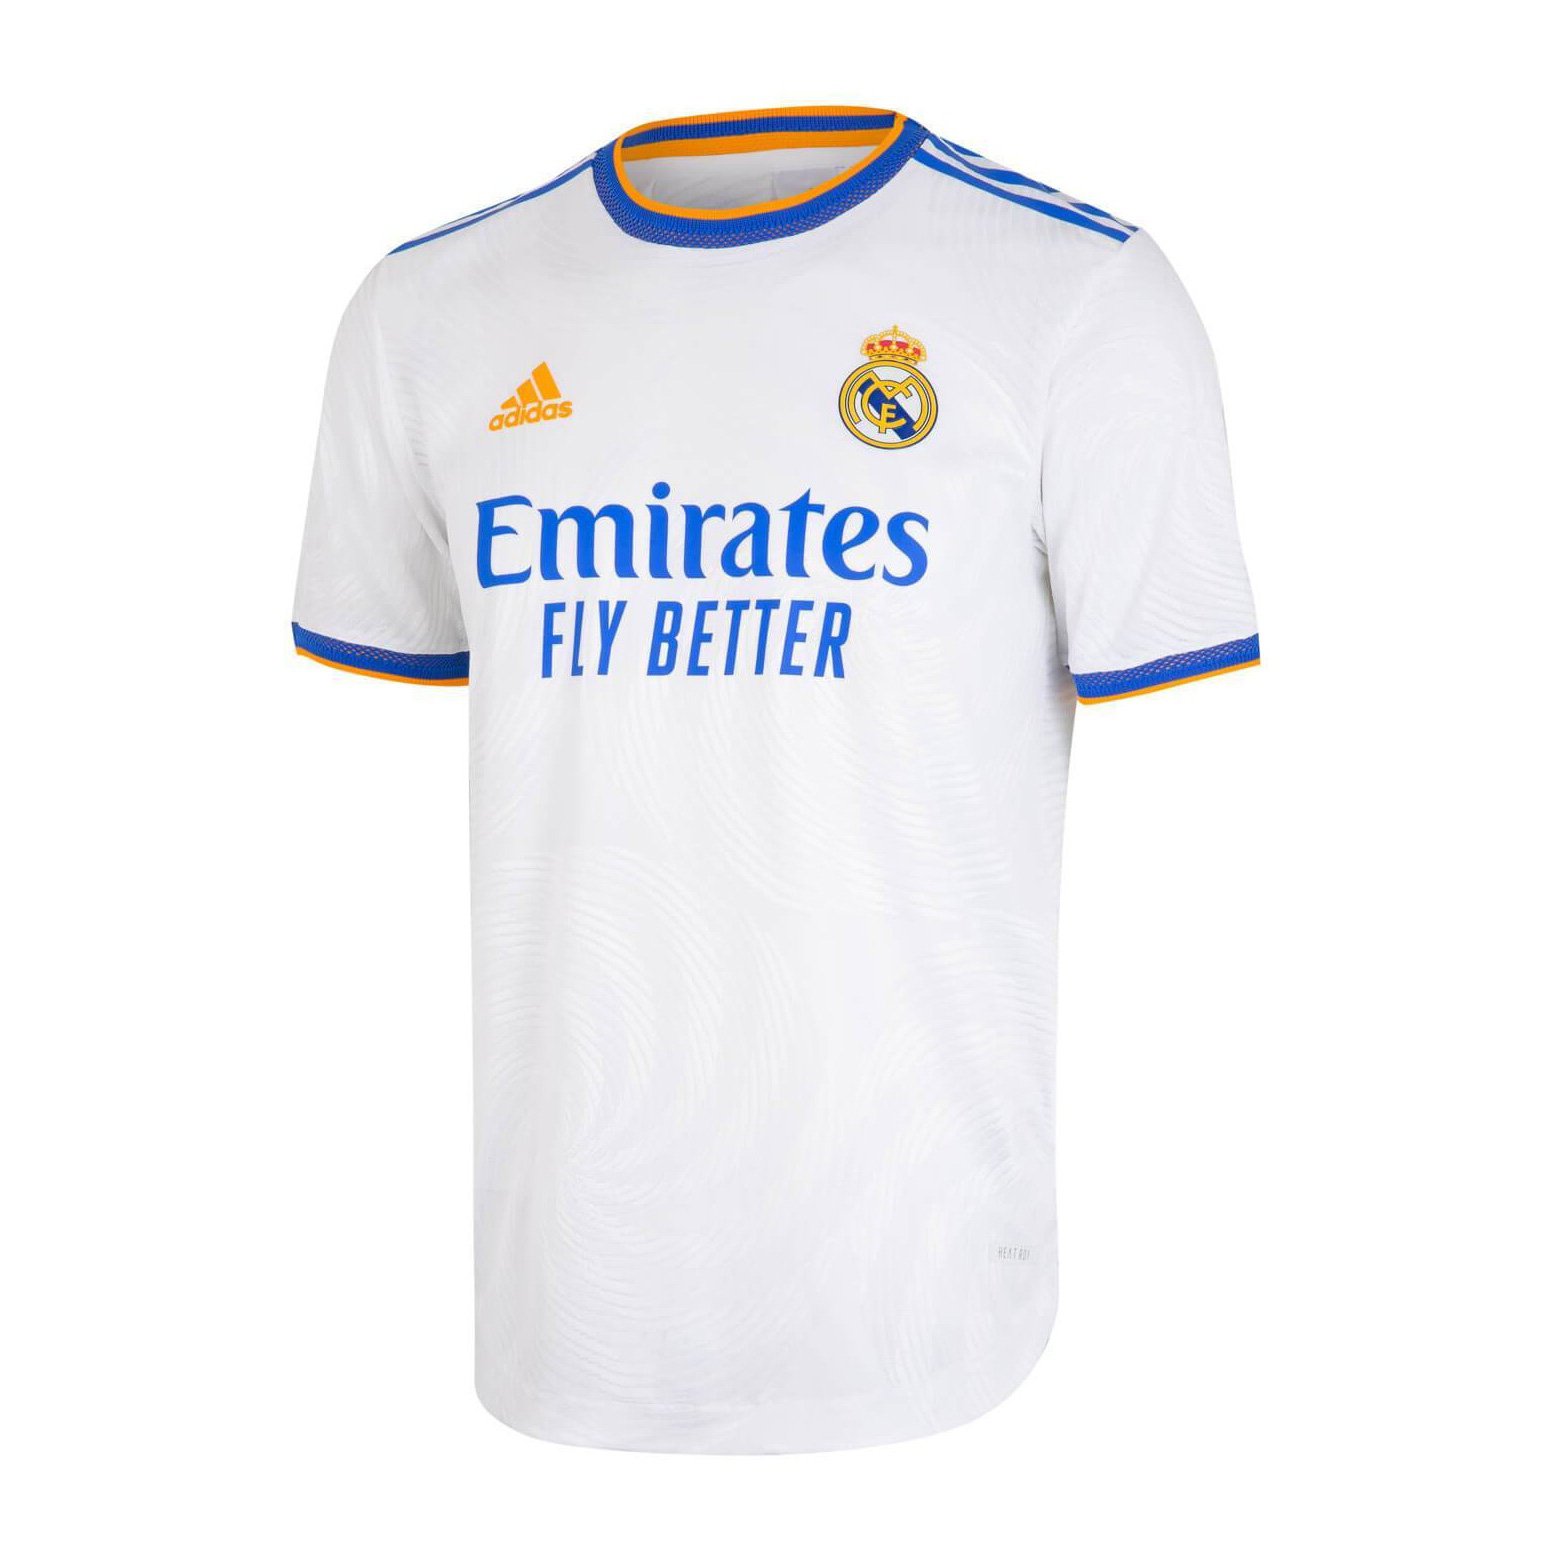 Patch FIFA Campeão Mundial 2022 - Real Madrid